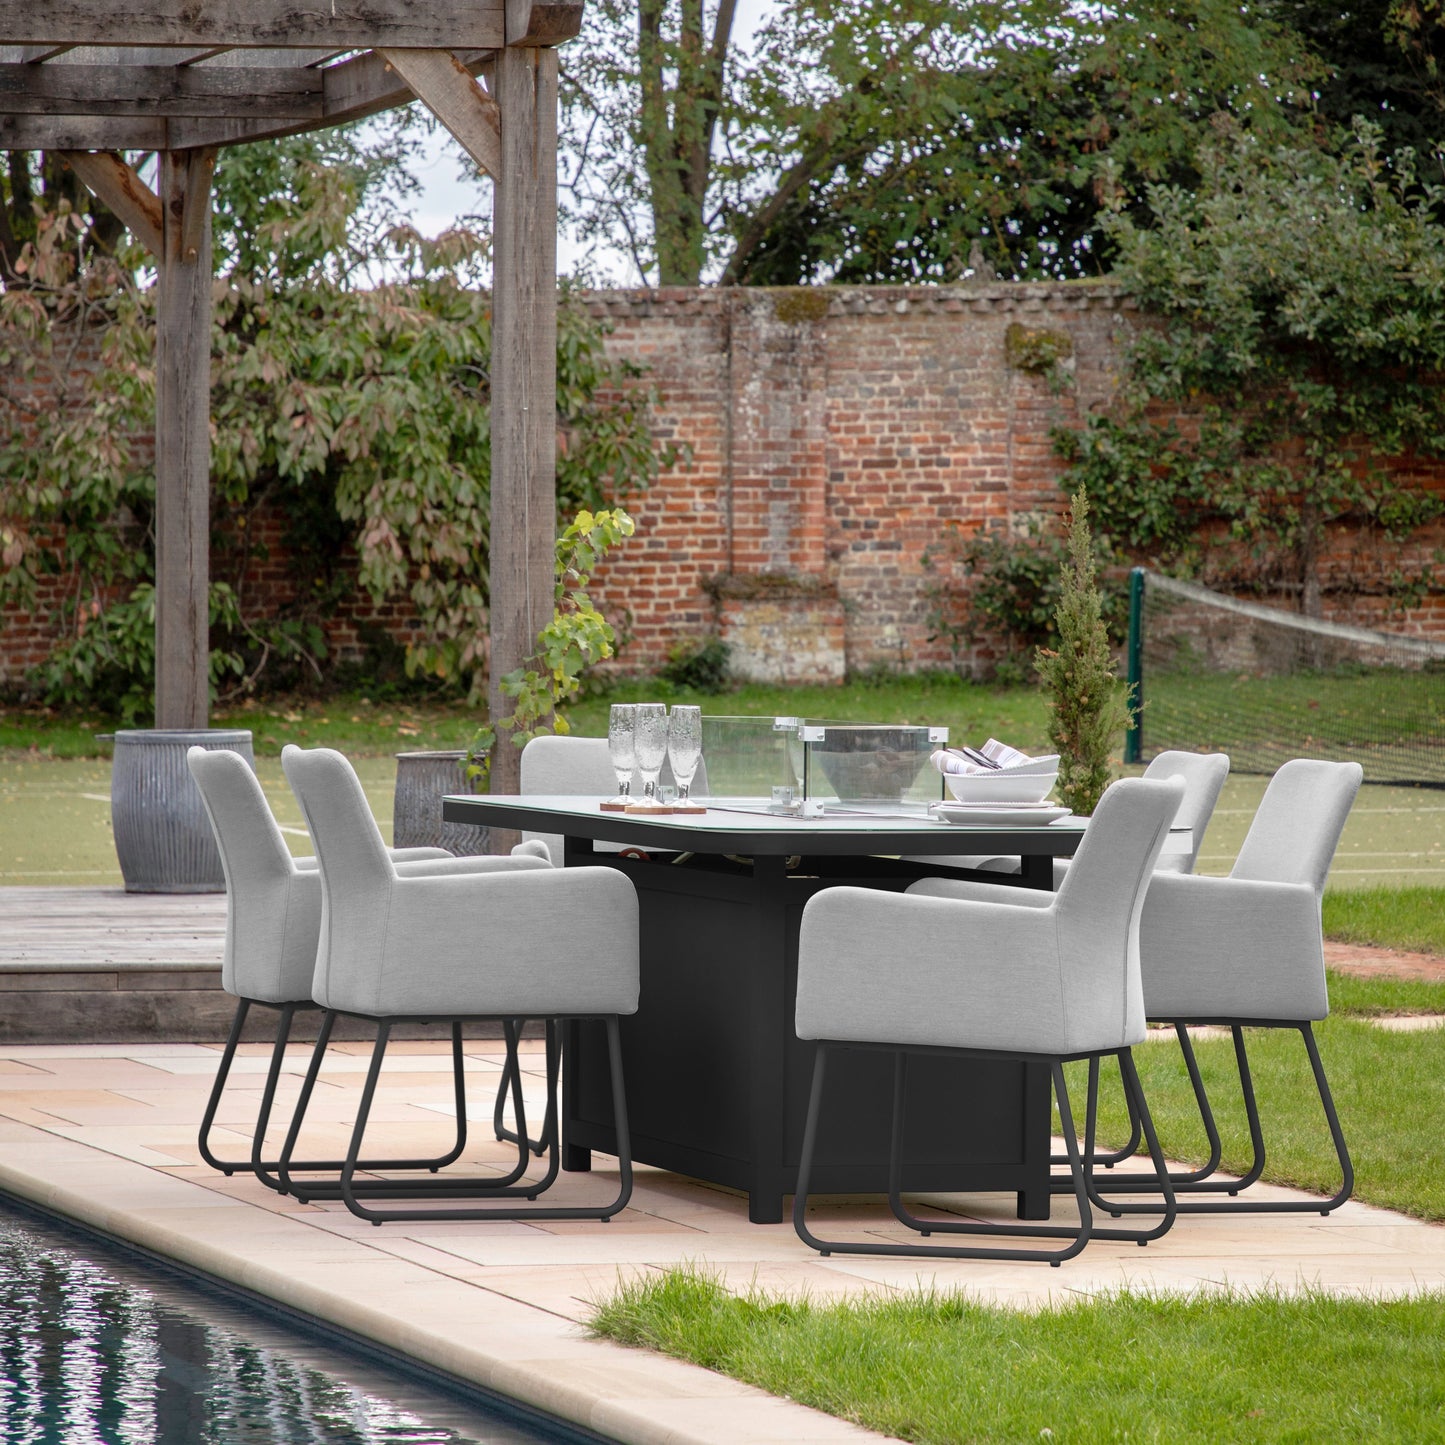 A 6 Seater Dining Set with Fire Pit Table by Kikiathome.co.uk, perfect for home furniture and outdoor entertaining.